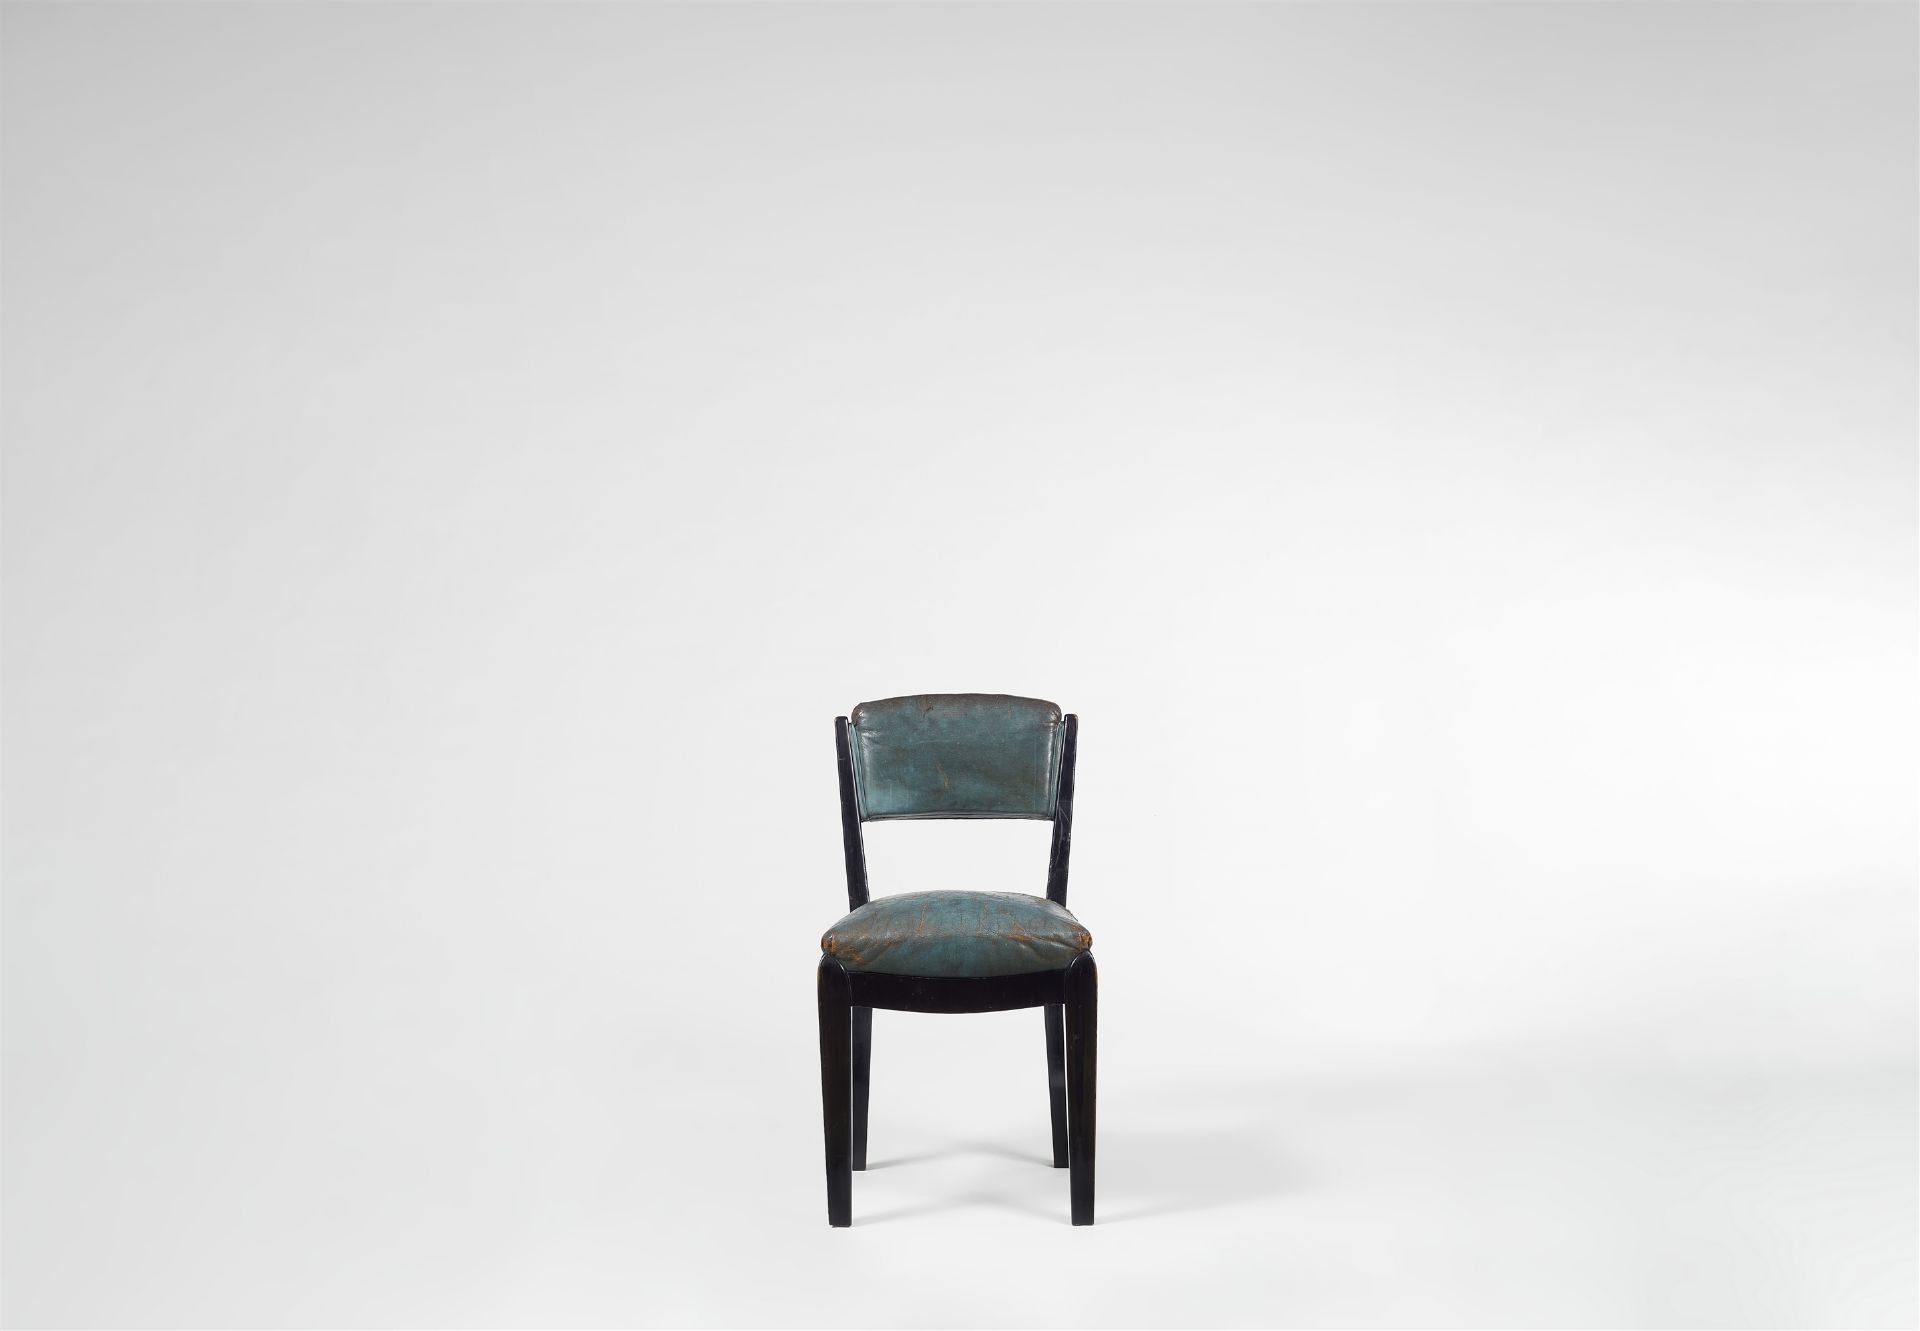 Chair , Attributed to Henry van de Velde or his circle - Image 5 of 5